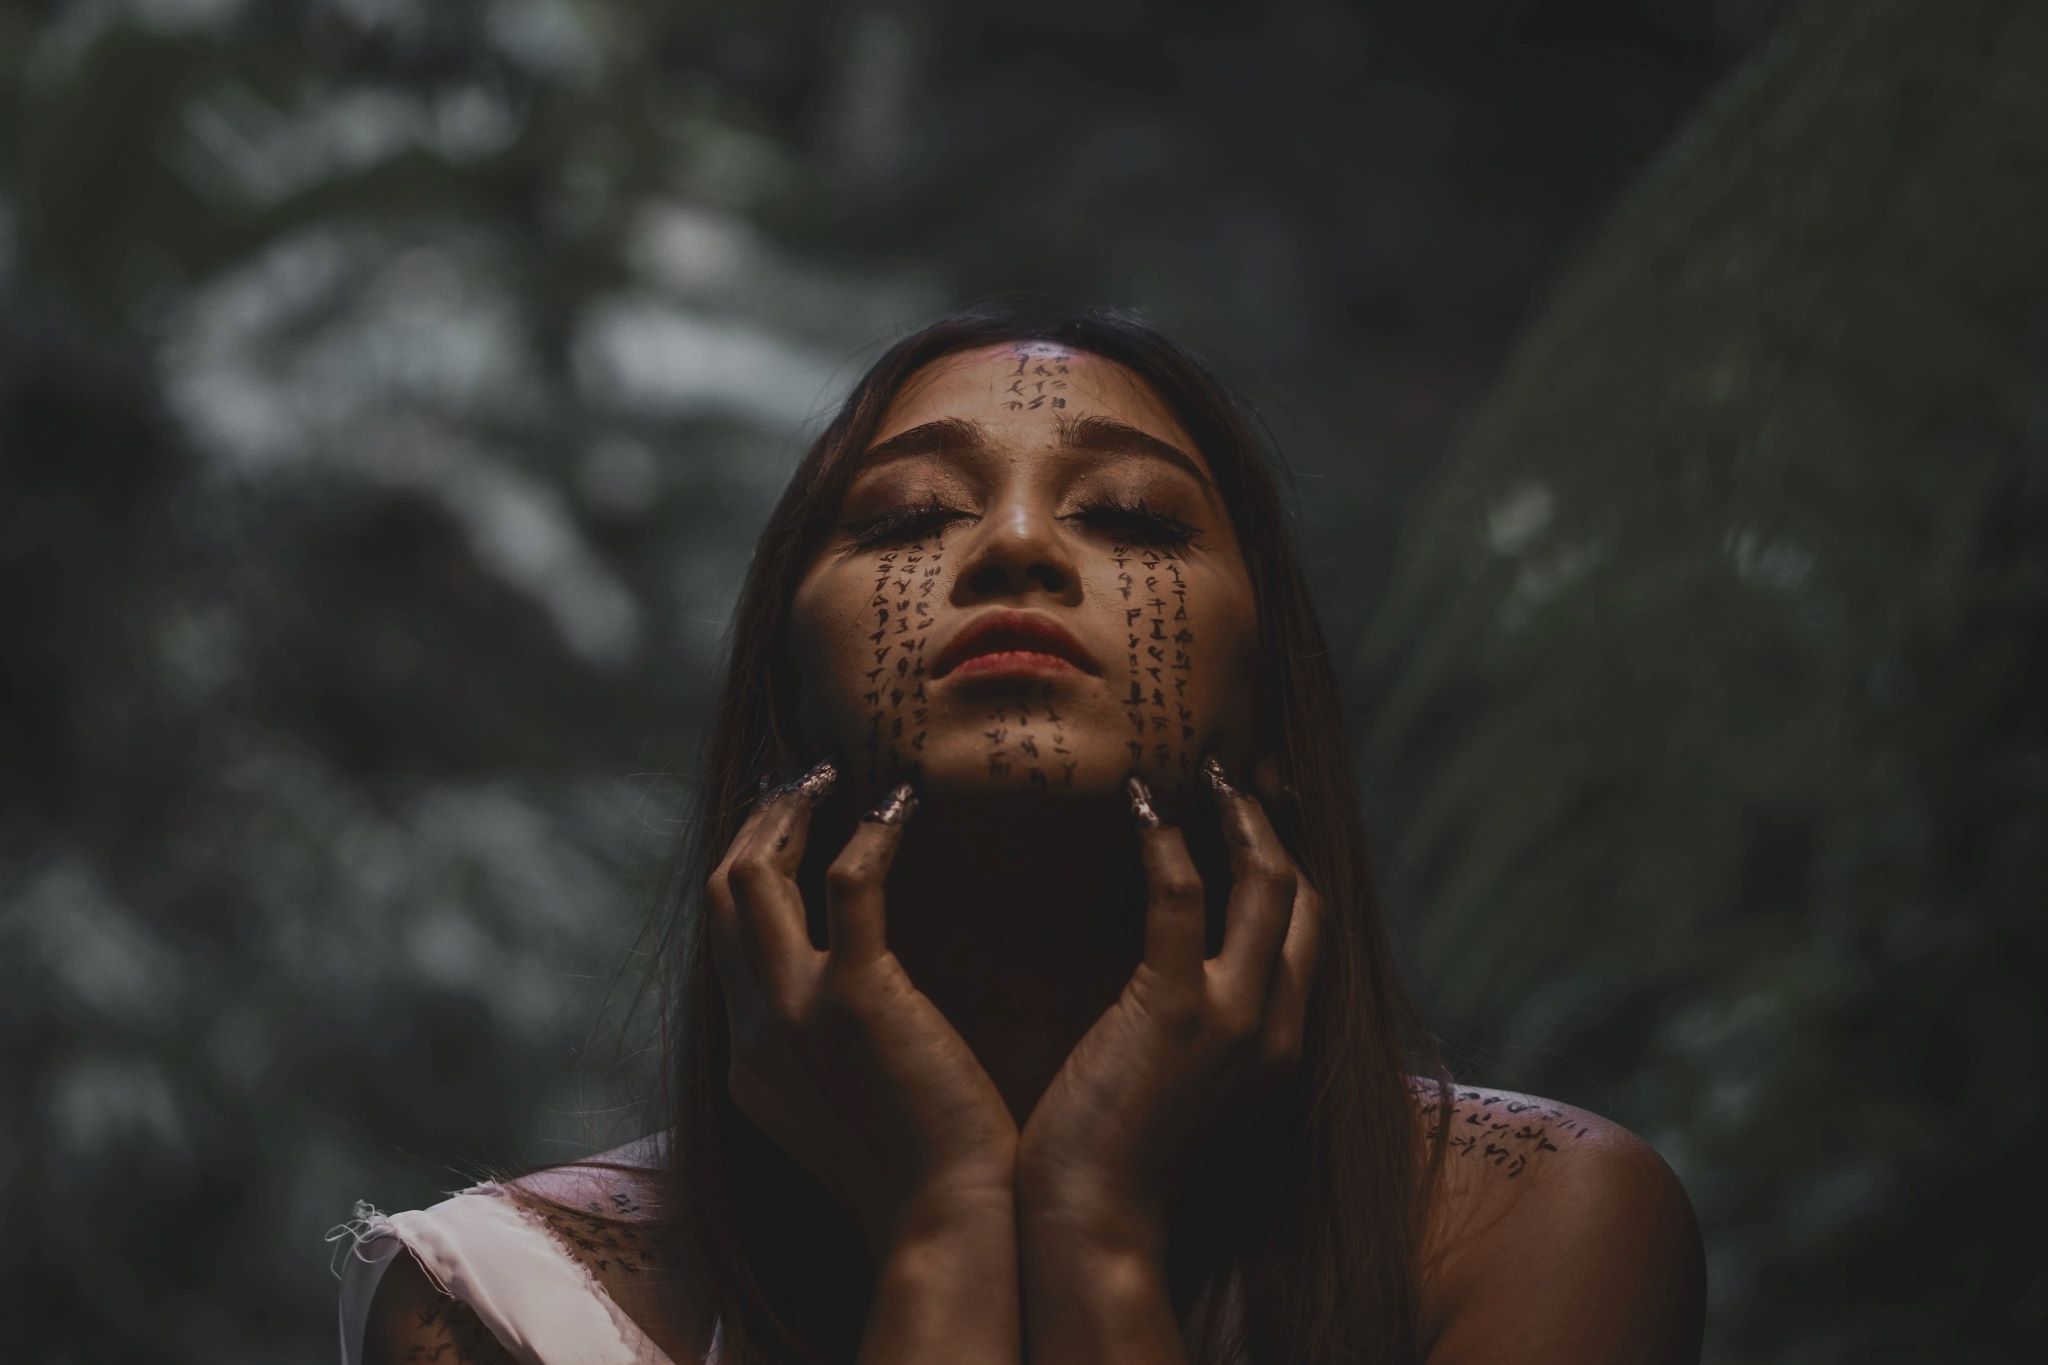 Photo: Paul Kerby Genil via <a href="https://www.pexels.com/photo/shallow-focus-photo-of-woman-with-face-art-3163994/" rel="noopener" target="_blank">Pexels</a>